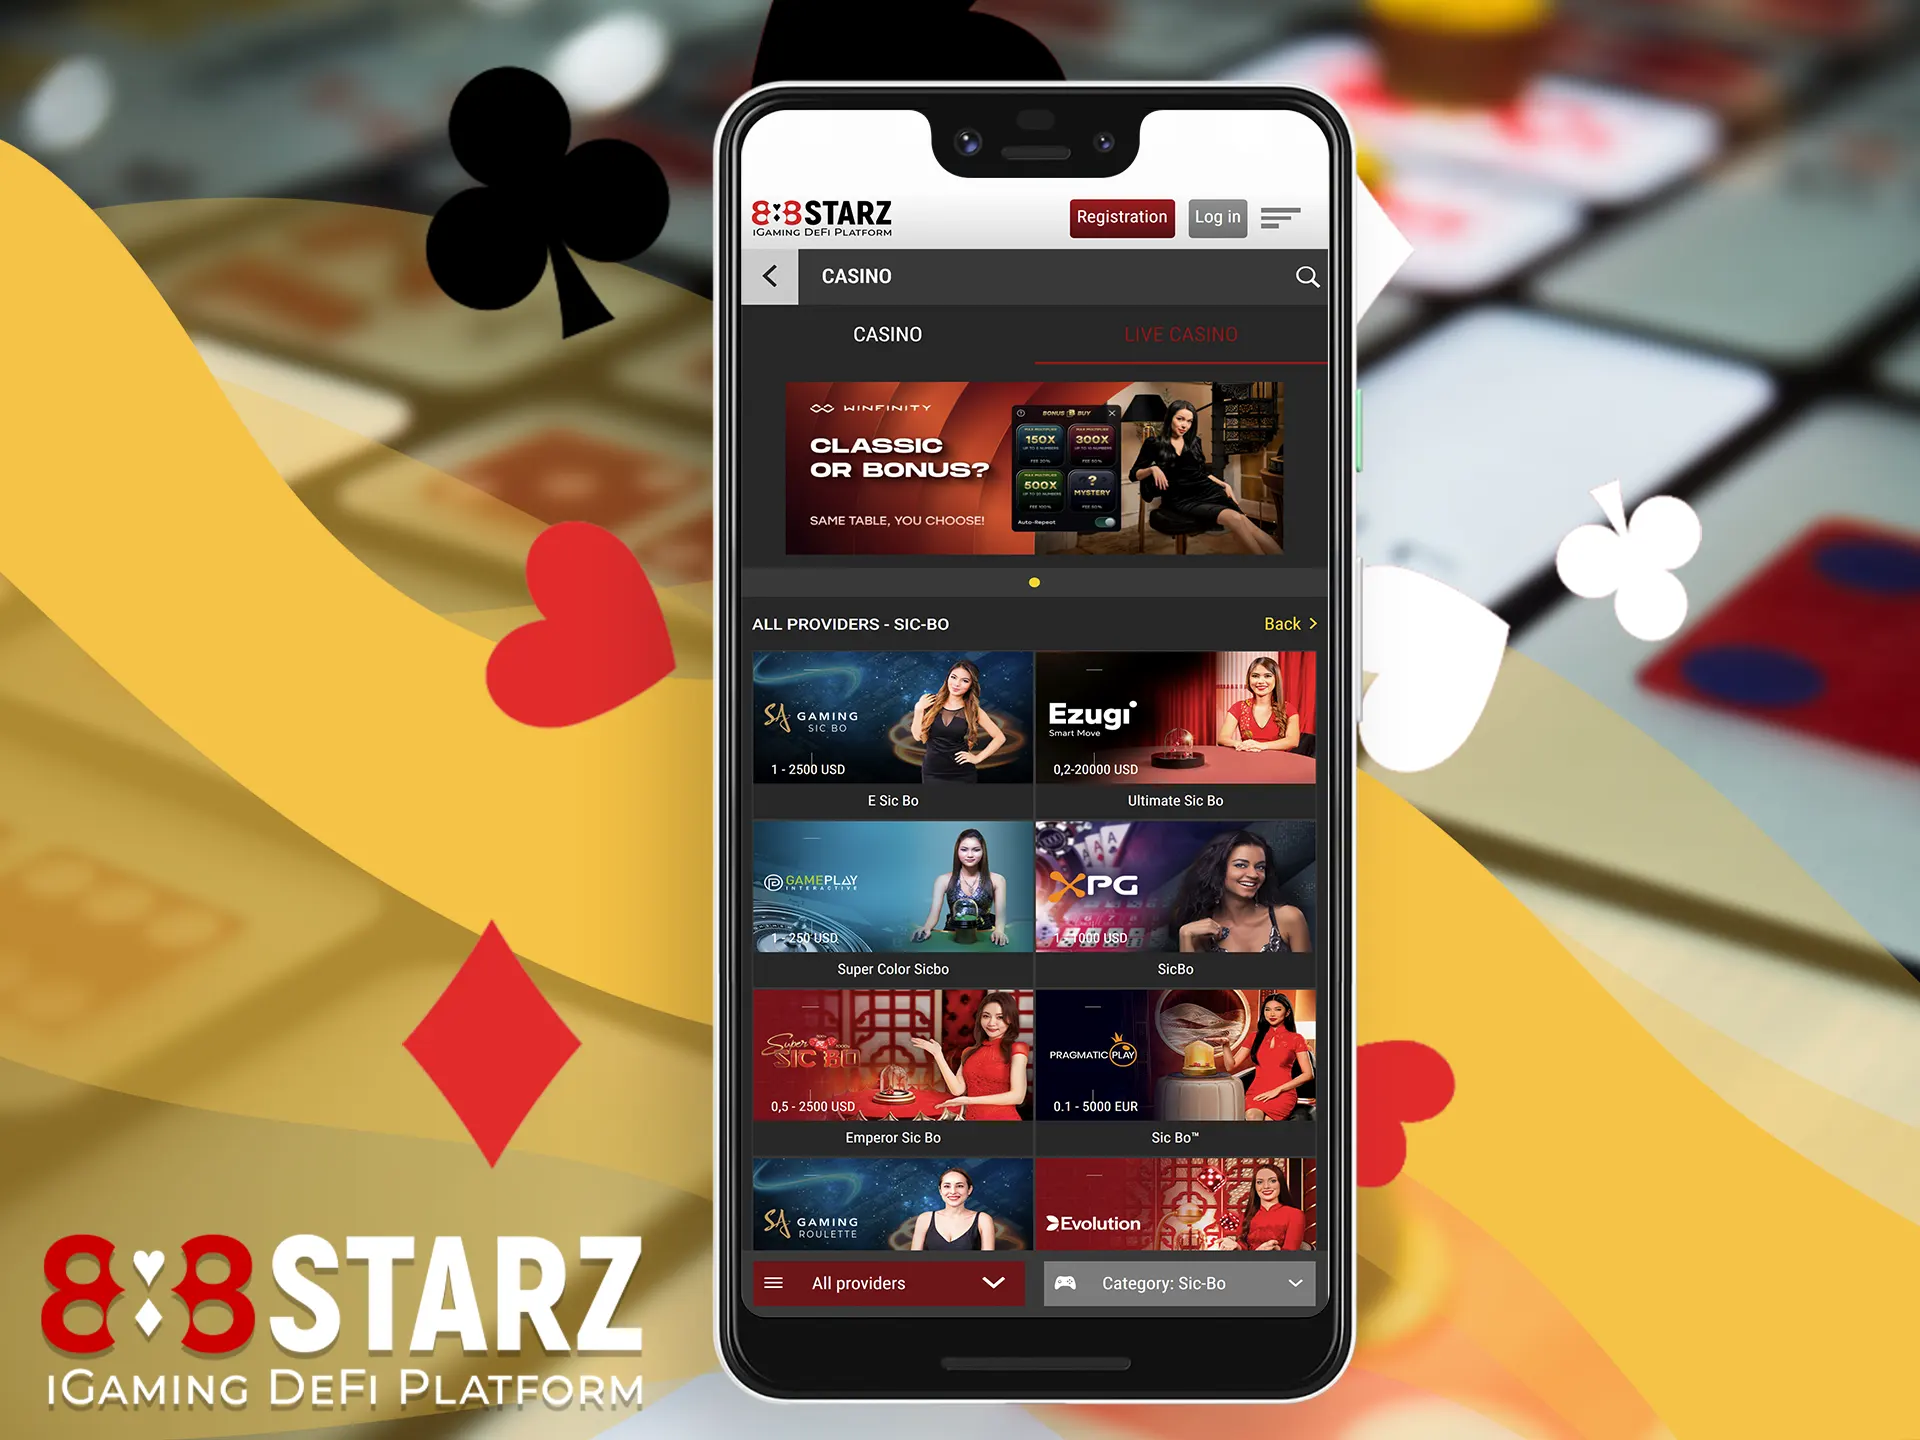 Try your hand at an exciting dice game on the 888starz platform.